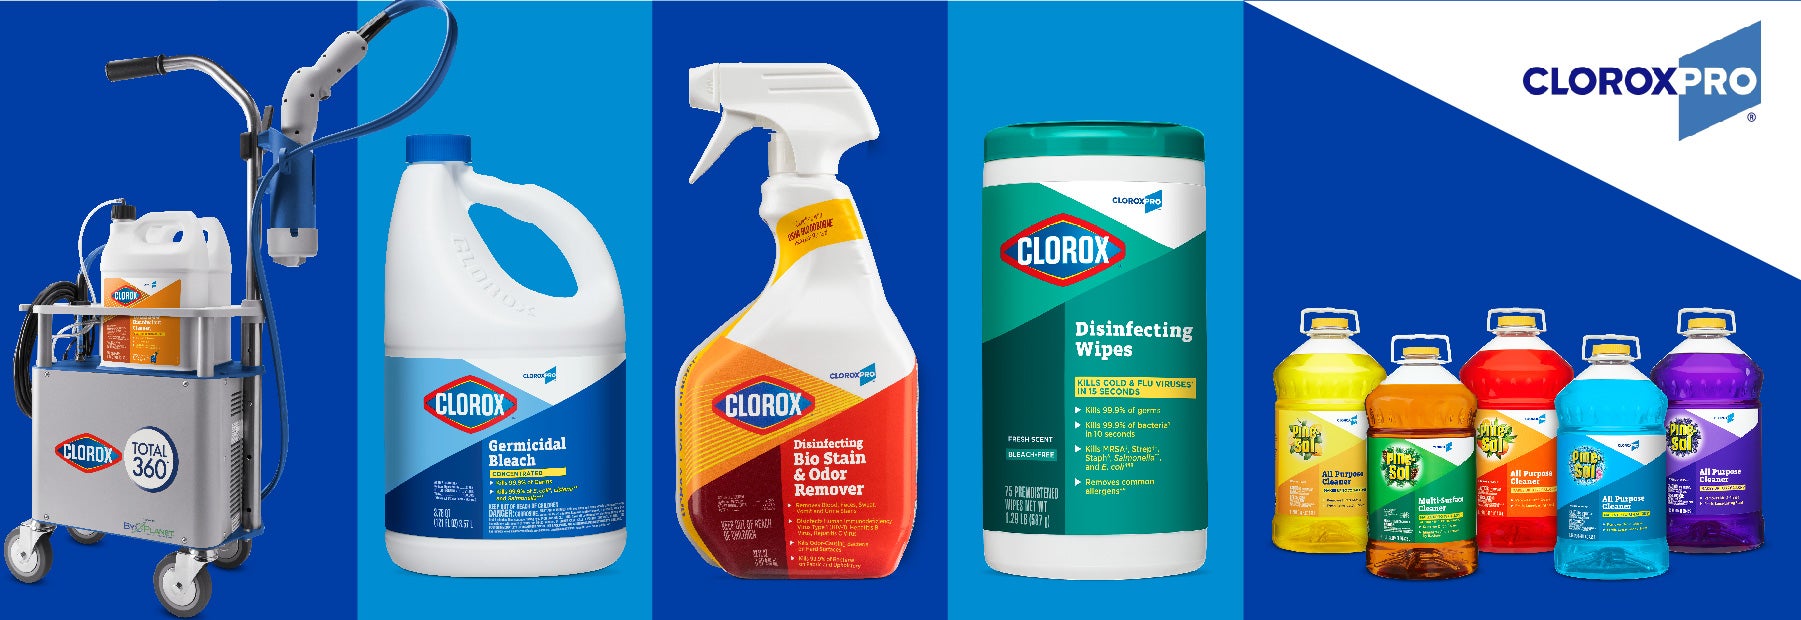 cloroxpro product new normal blog